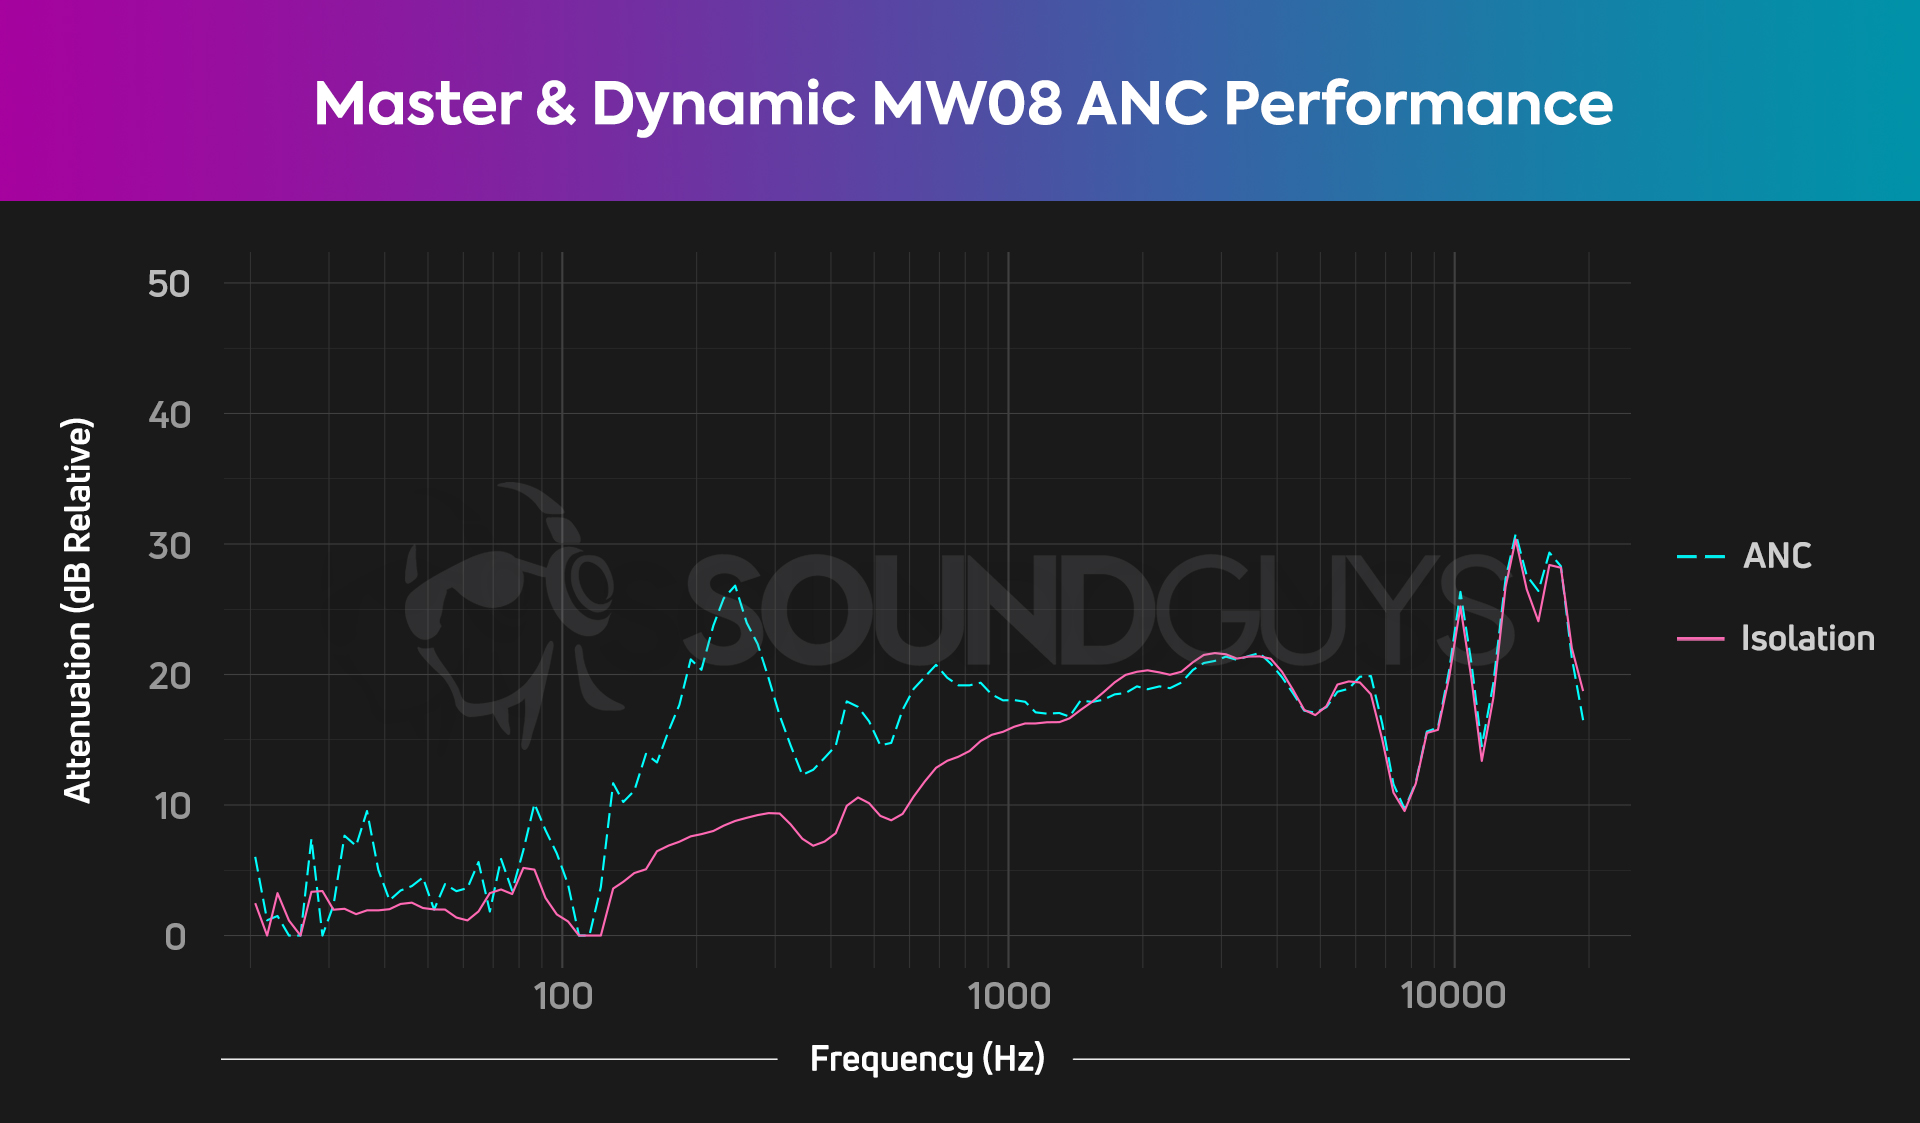 The noise canceling chart for the Master & Dynamic MW08 true wireless earbuds shows pretty good low-frequency attenuation.